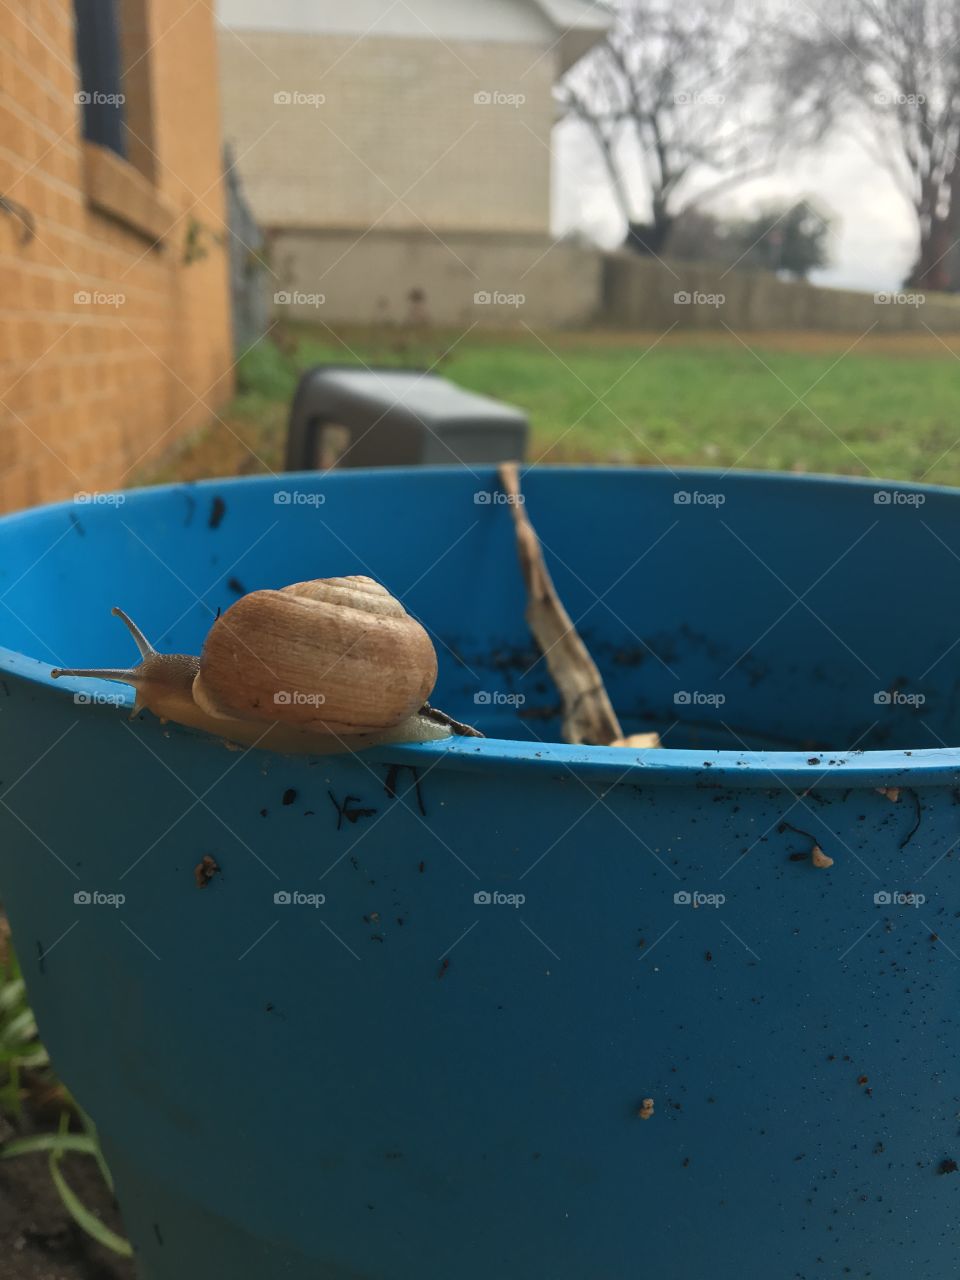 The beauty of snails